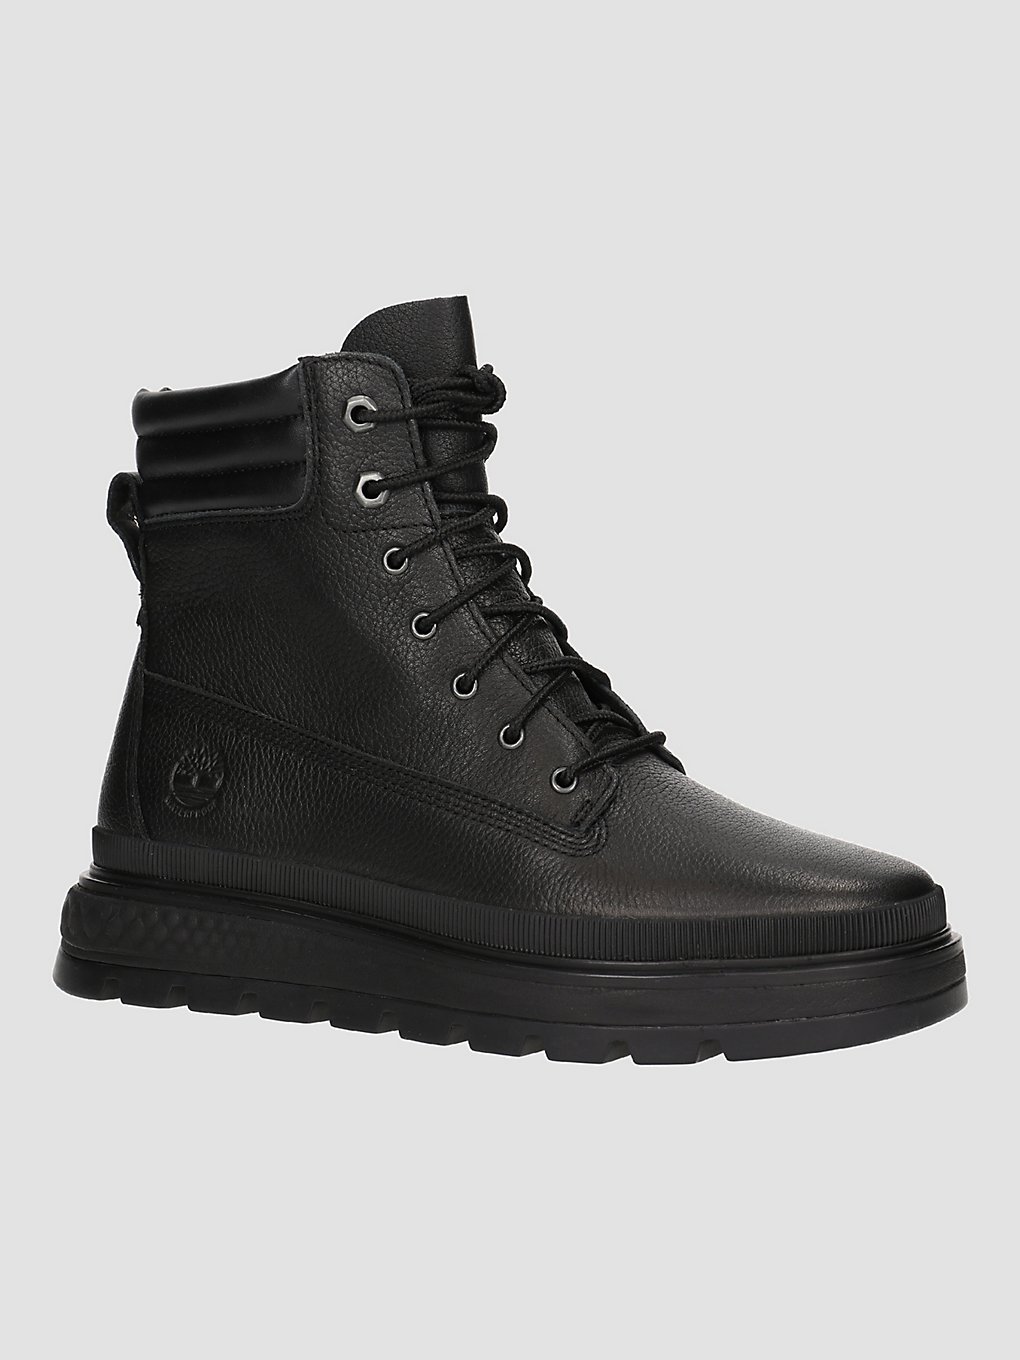 Timberland Ray City 6 in Boot WP Boots jet black